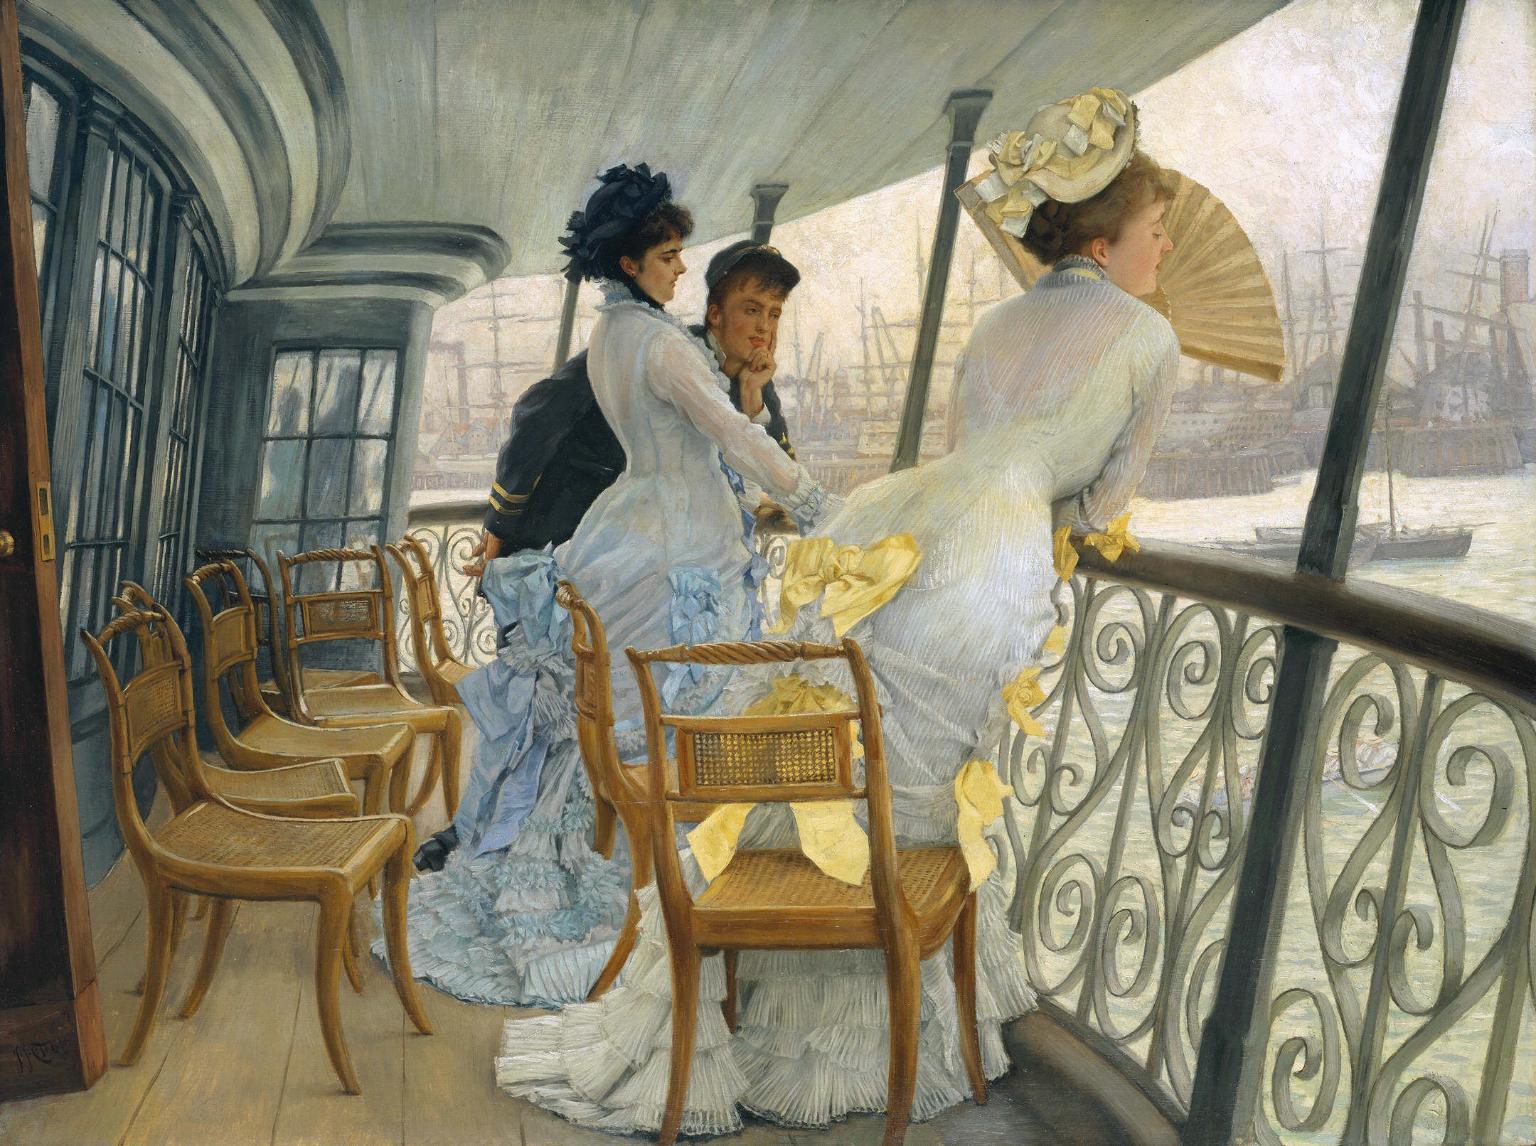 The Gallery of HMS Calcutta (Portsmouth) c.1876 by James Tissot 1836-1902